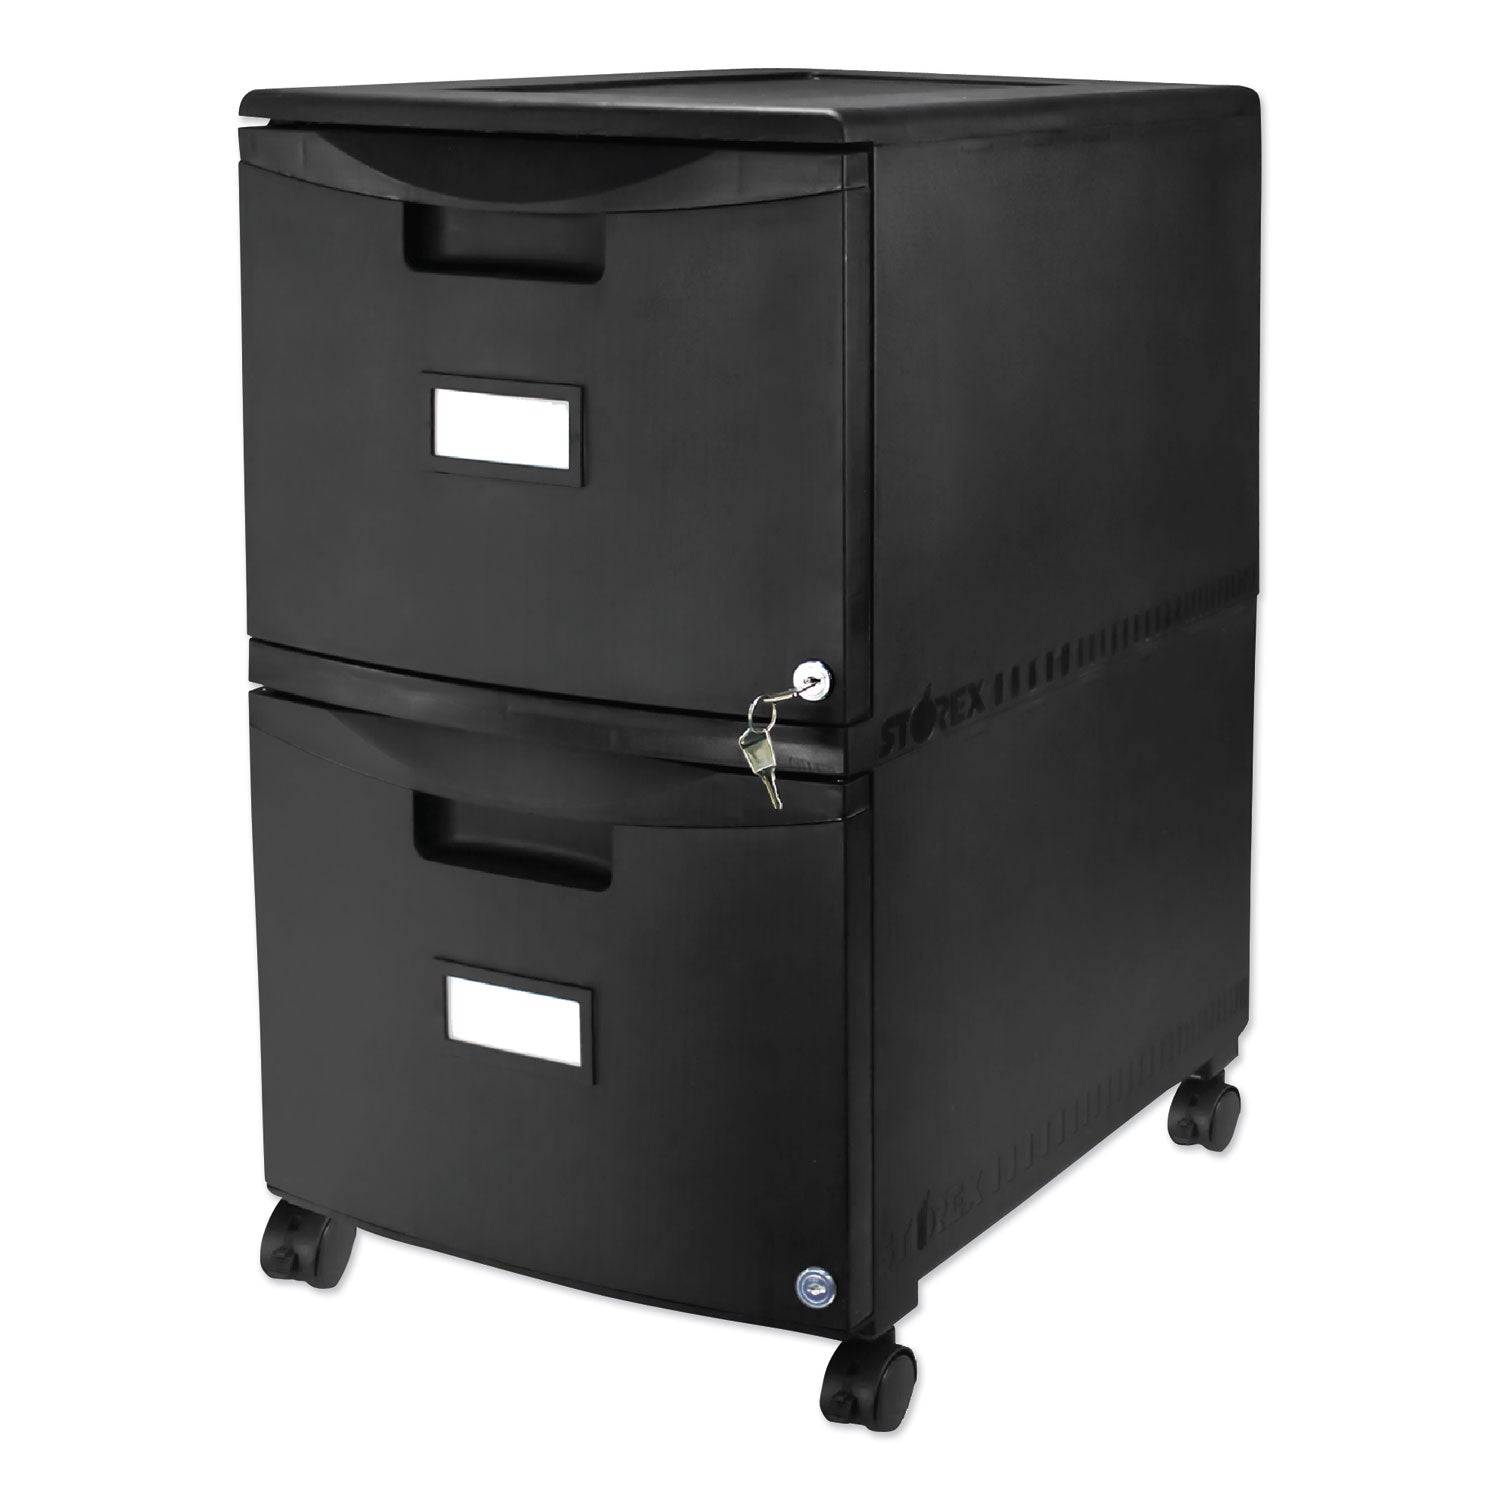 two-drawer-mobile-filing-cabinet-2-legal-letter-size-file-drawers-black-1475-x-1825-x-26_stx61312b01c - 8